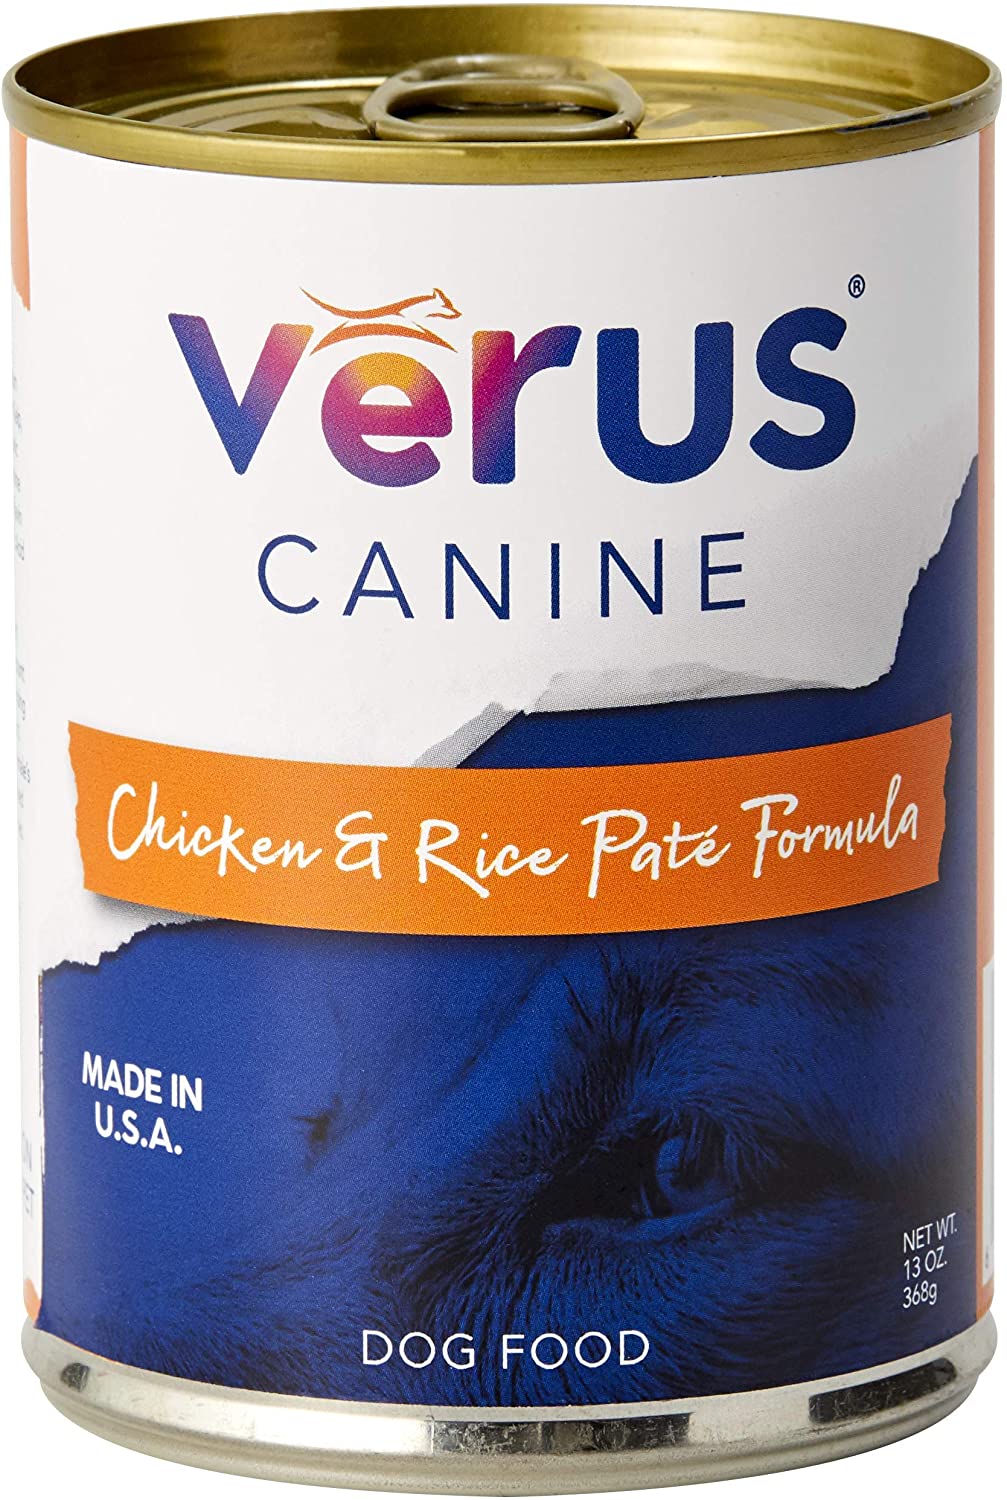 Verus Chicken & Rice Canned Dog Food - 13 oz Cans - Case of 12  